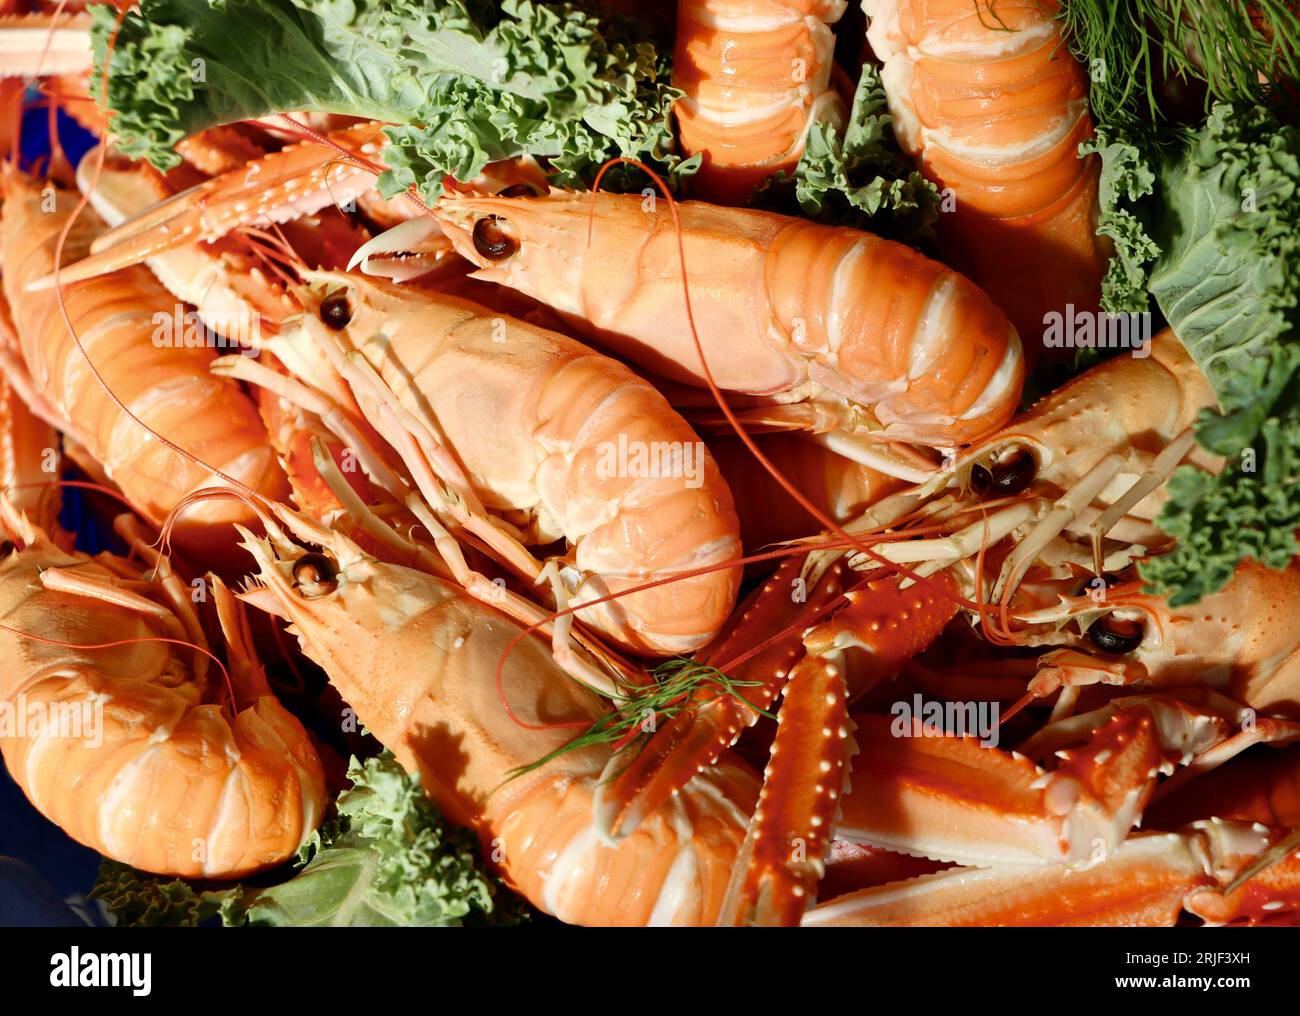 Cooked langoustines, Nephrops norvegicus, also called Norway lobsters (havskräfta in Swedish) ready to eat on dinner table in Sweden. Stock Photo